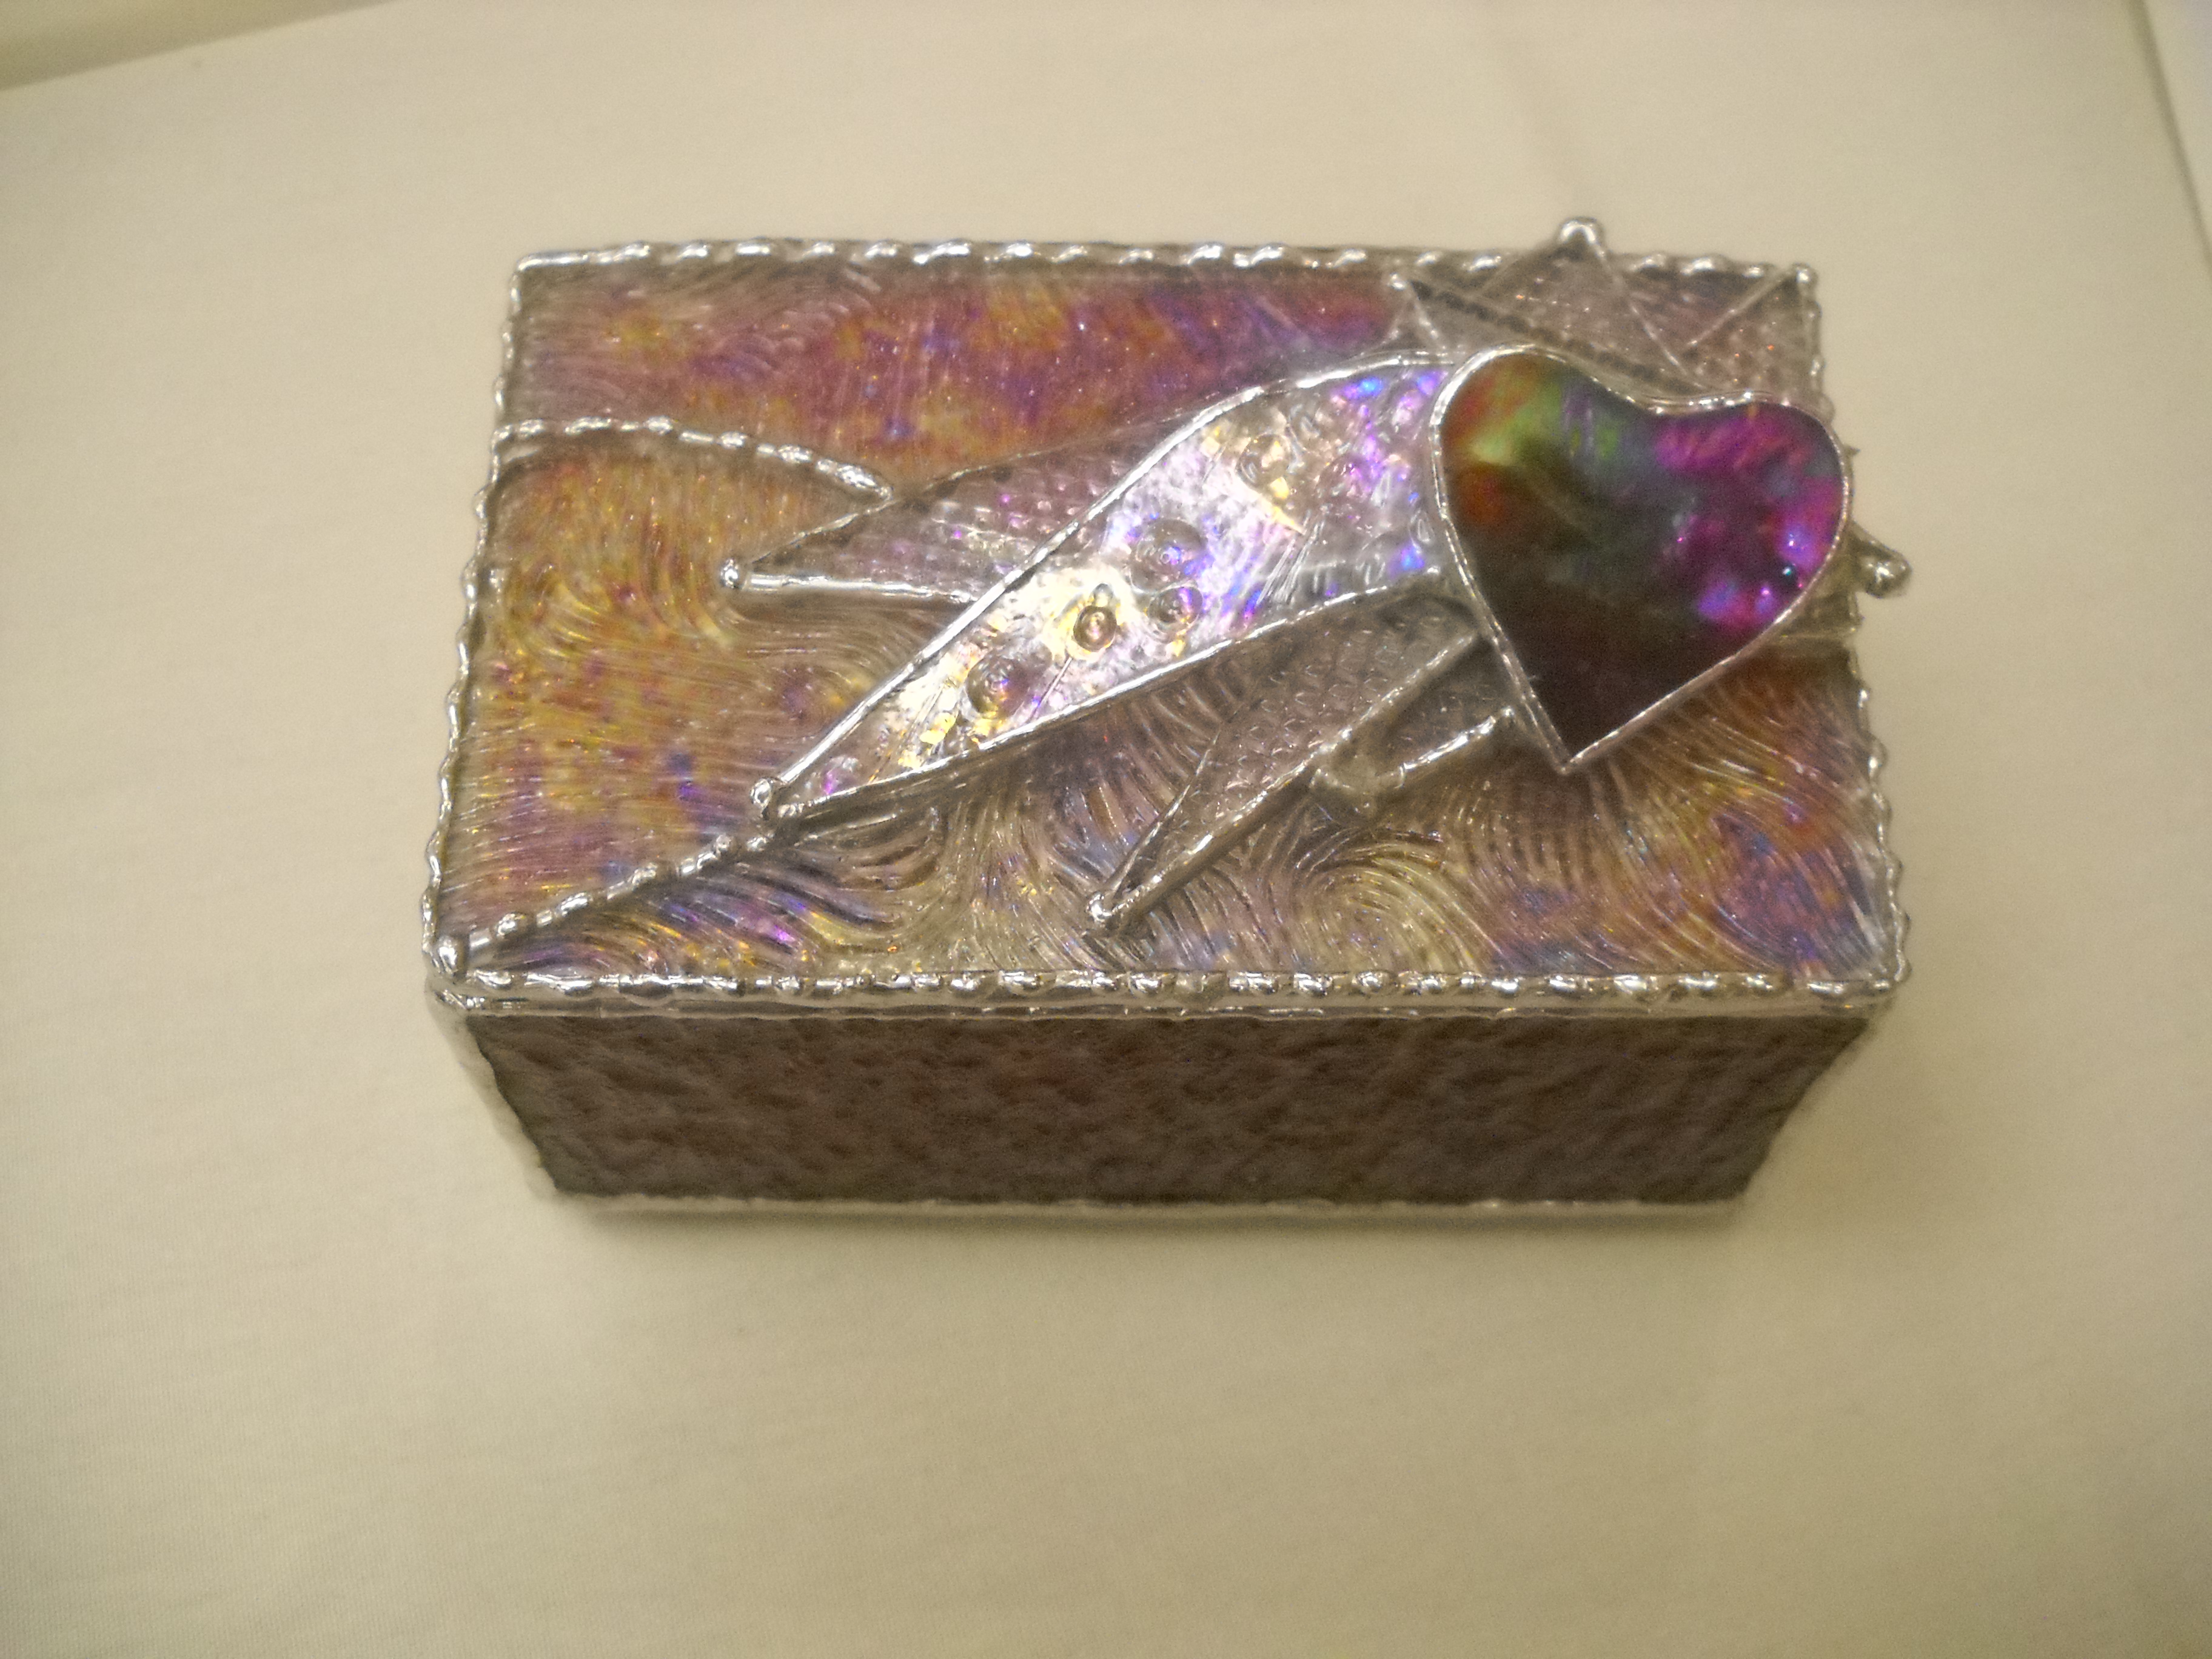 A glass jewelry box with a heart on top. The box is a purple and pink color